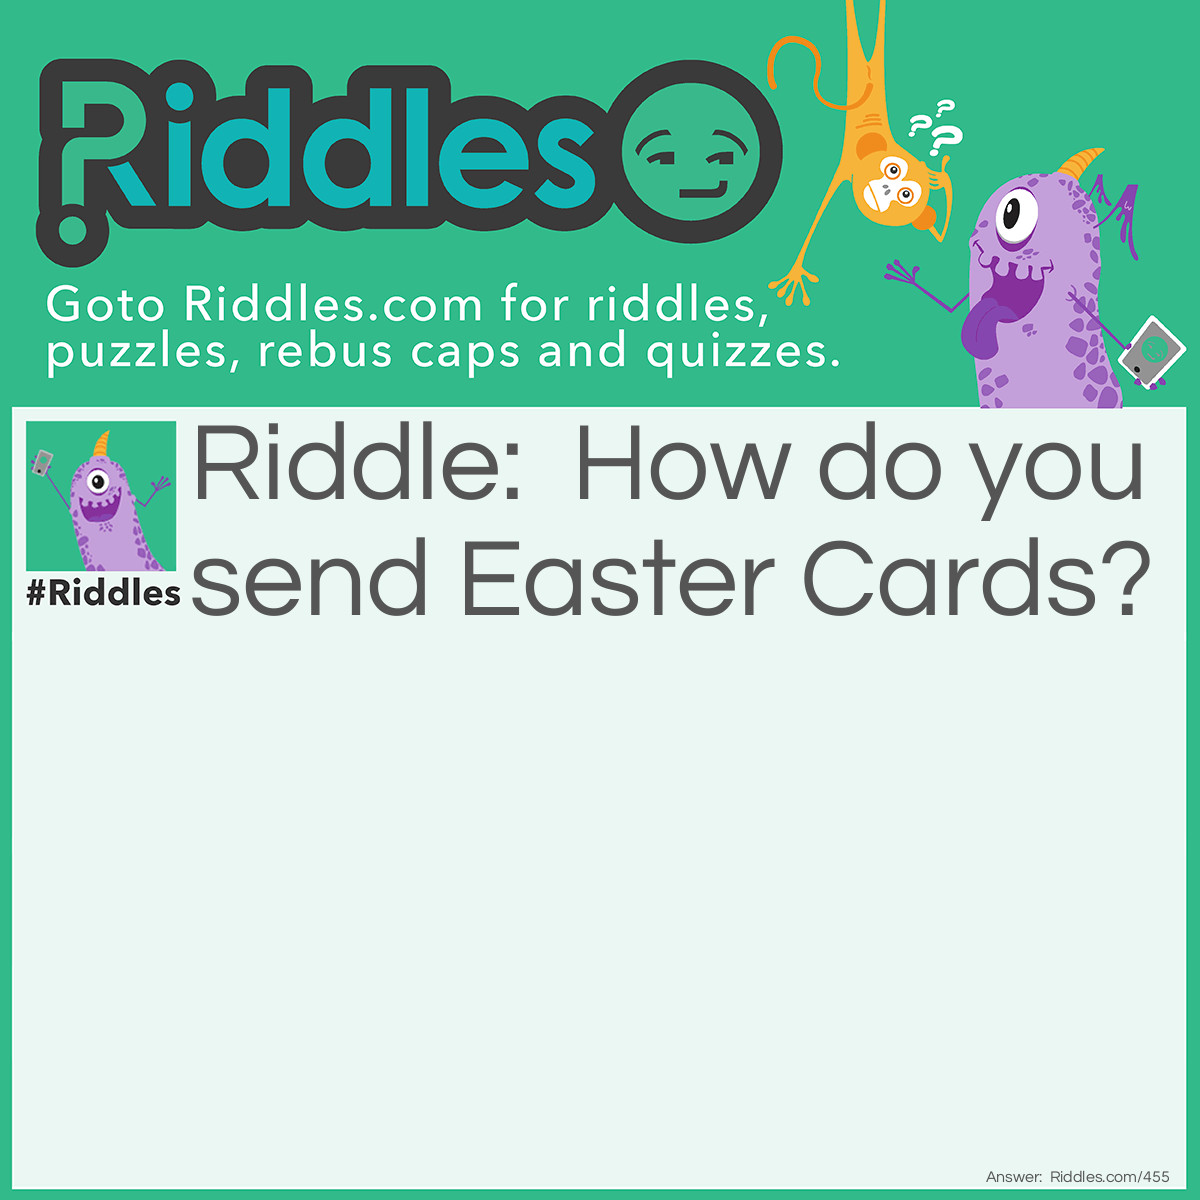 Riddle: How do you send Easter Cards? Answer: By hare mail!